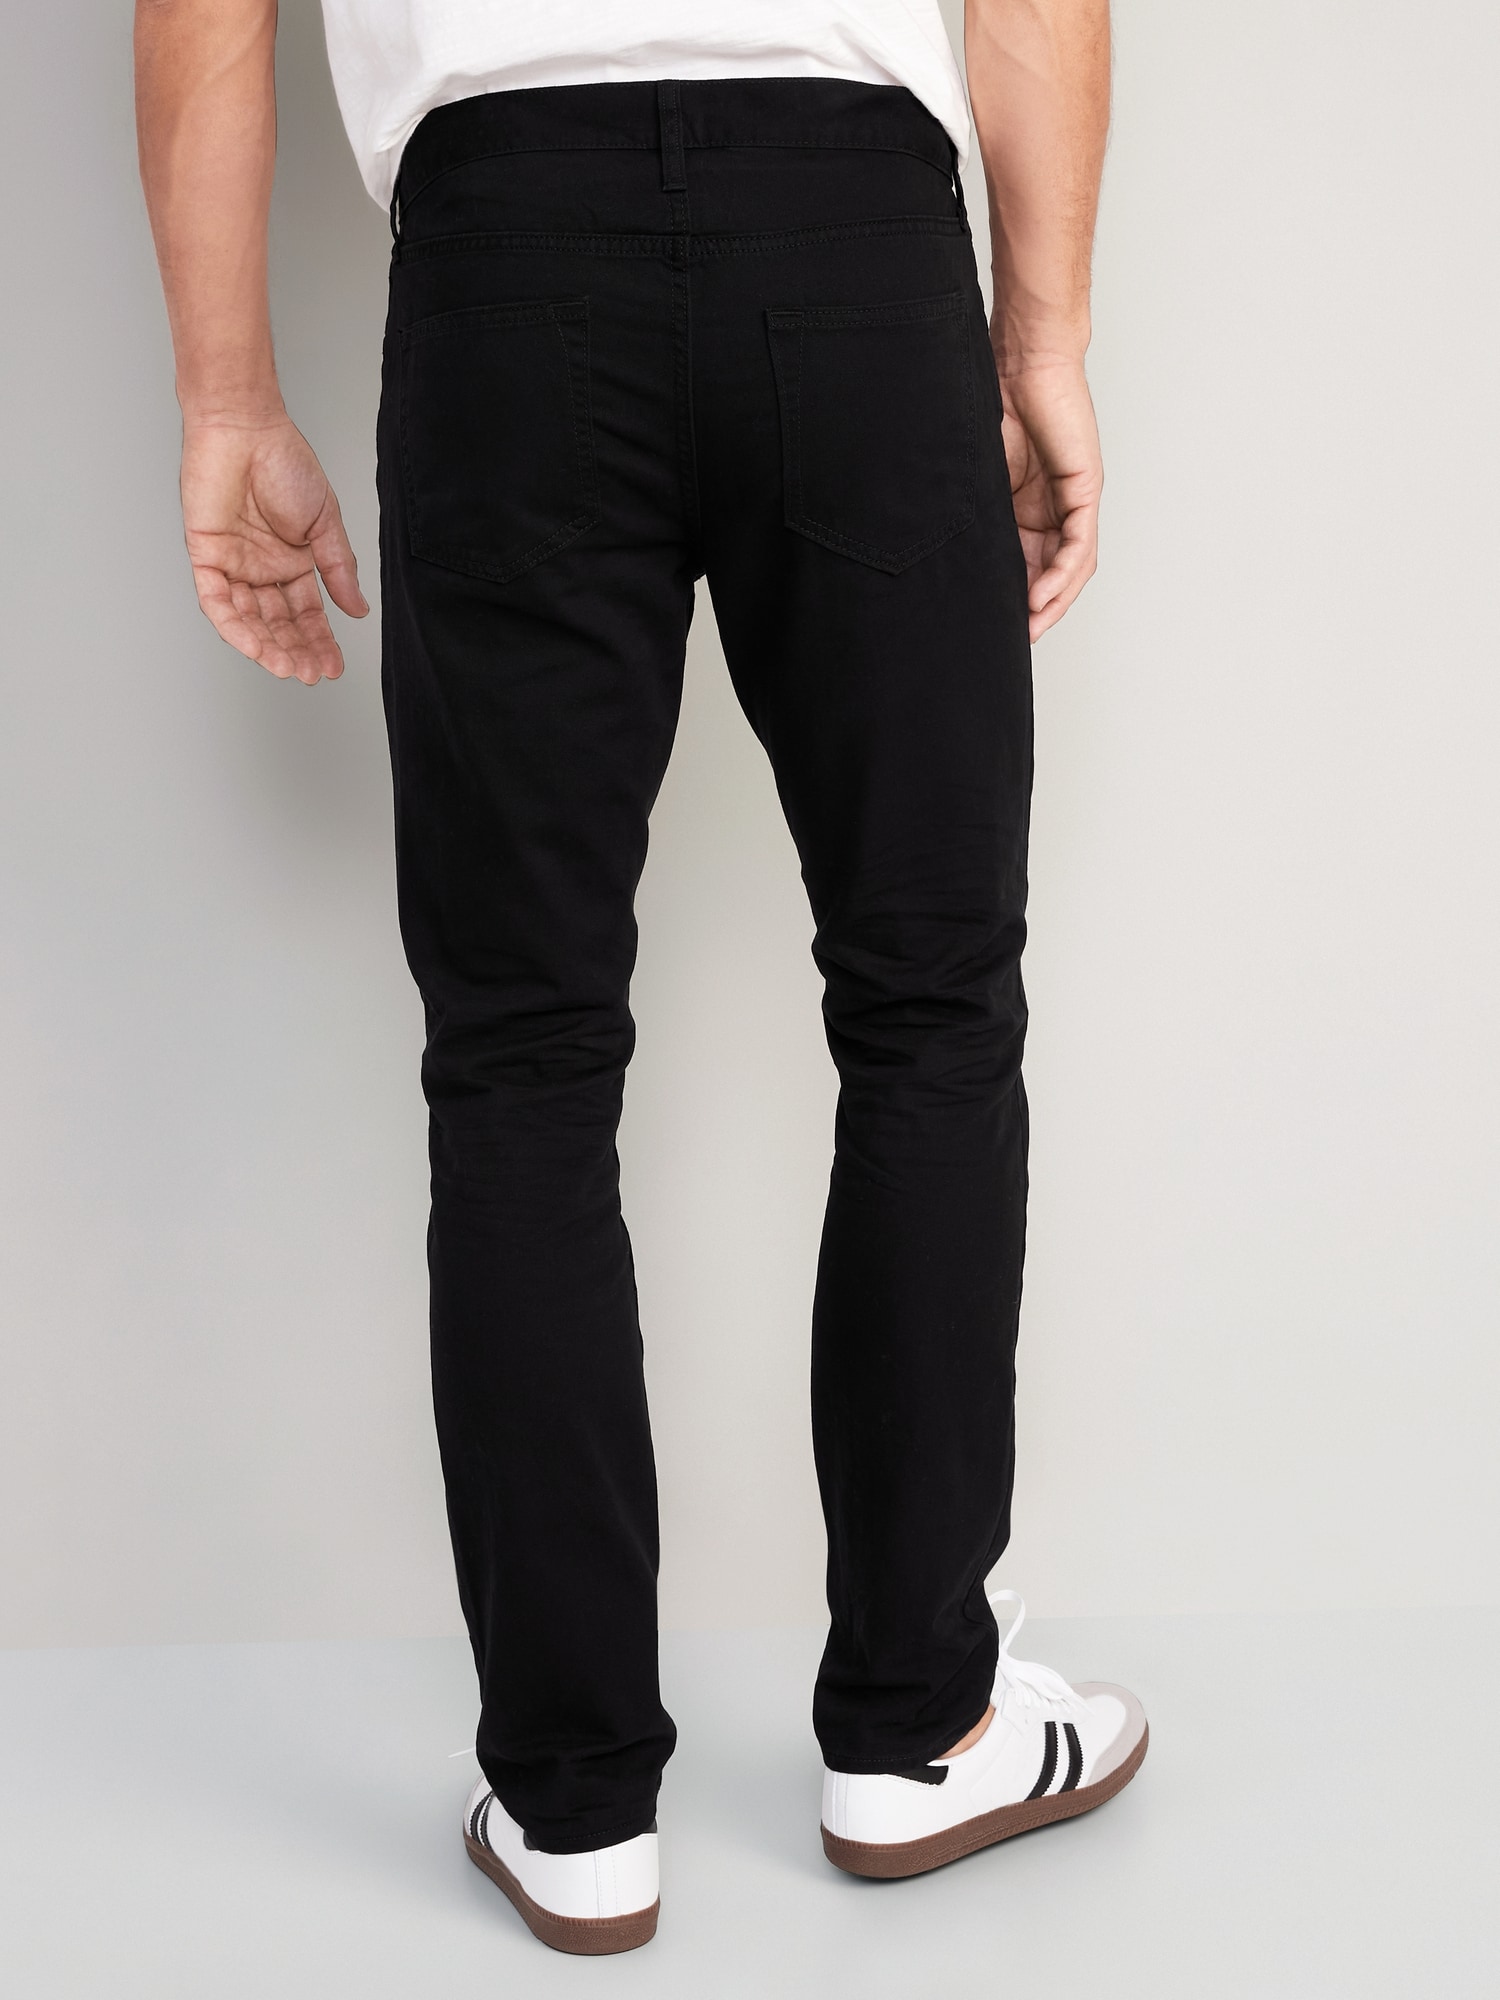 Wow Skinny Non-Stretch Jeans for Men | Old Navy